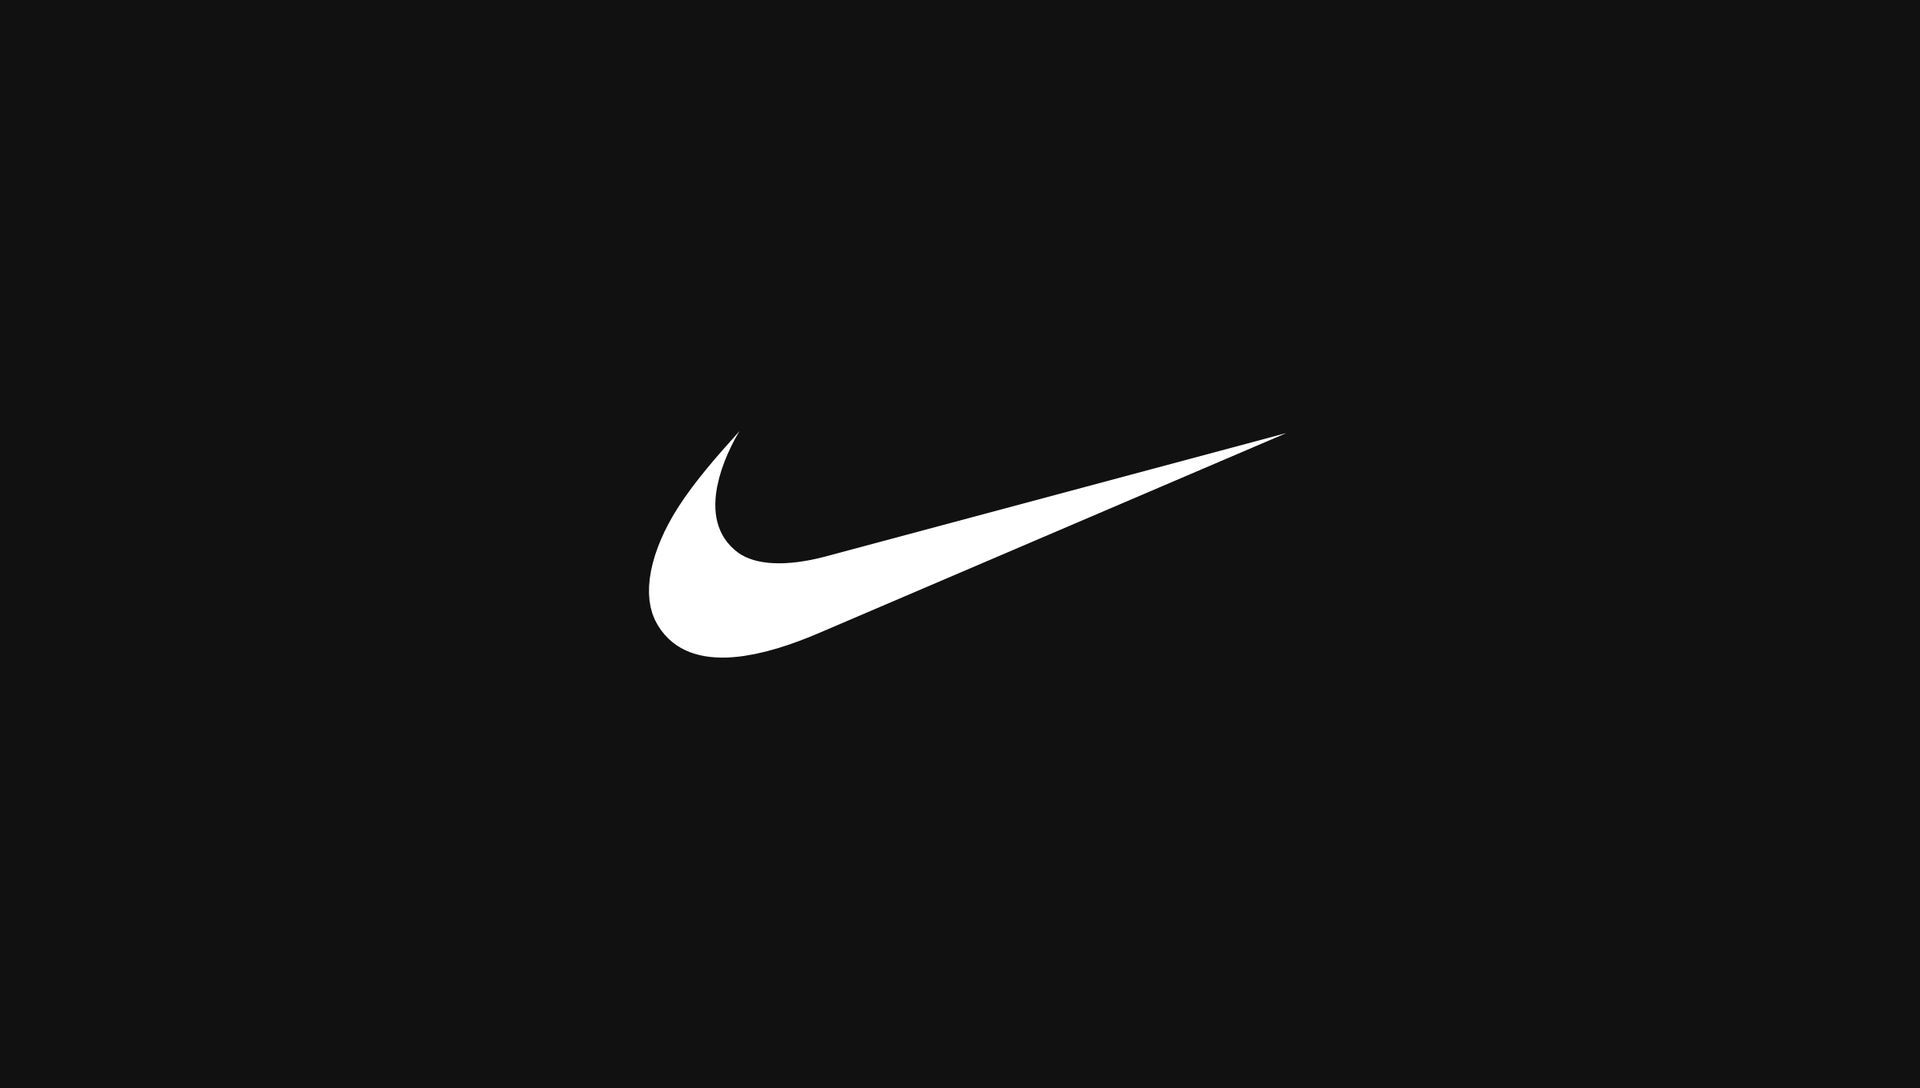 Nike. Just Do It